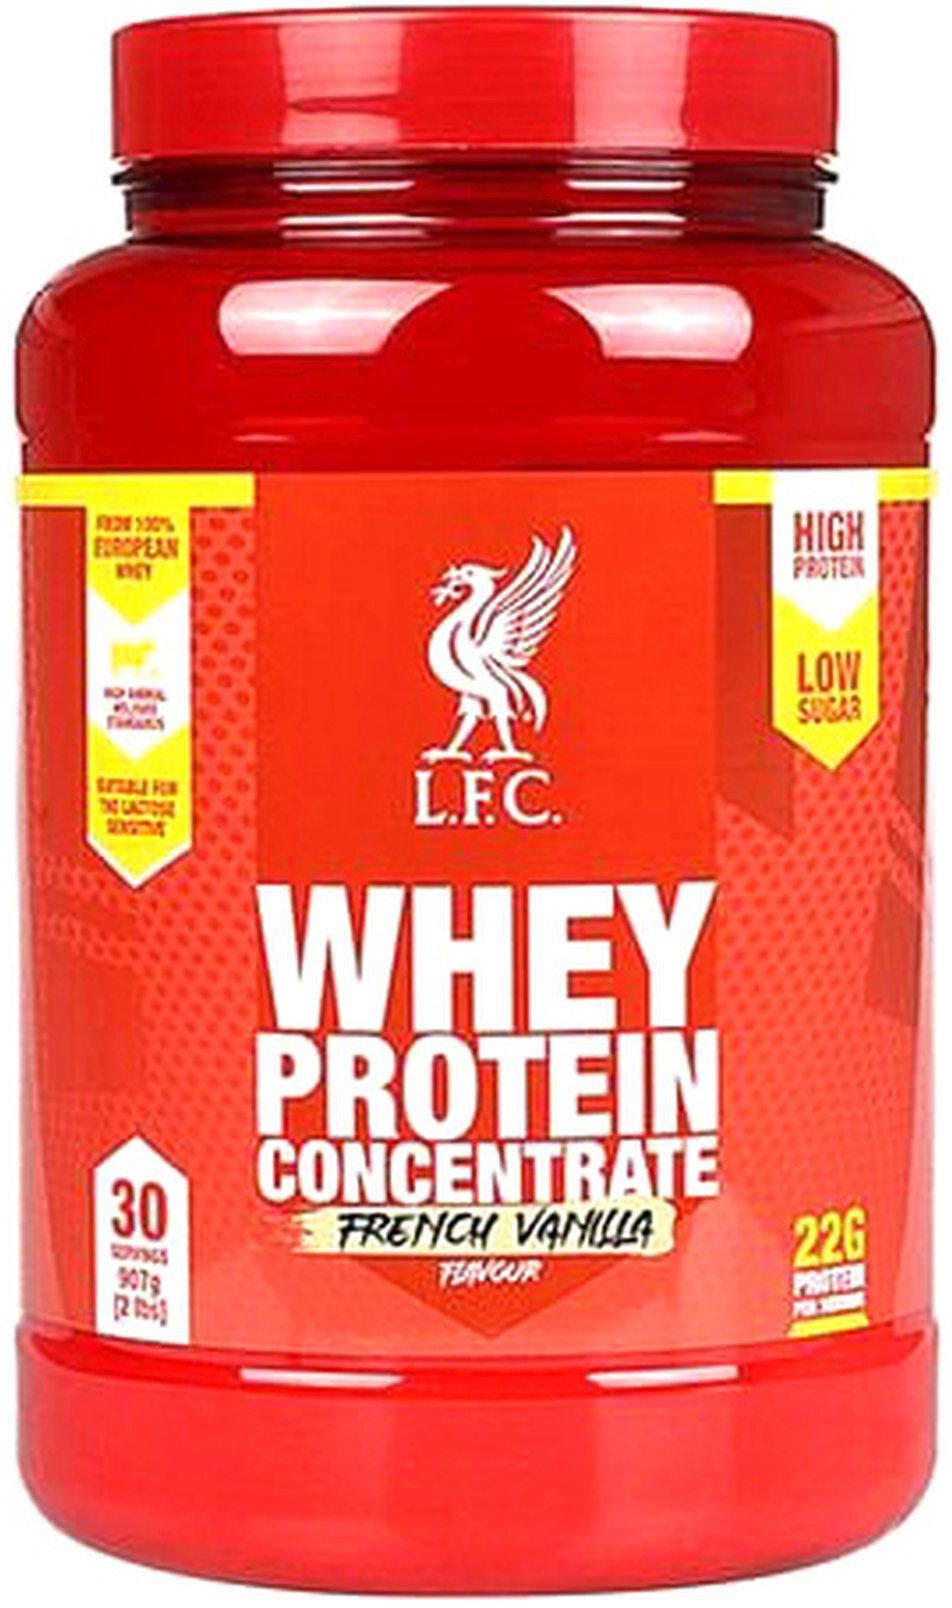 L.F.C. French Vanilla Flavoured Whey Protein Concentrate 907g